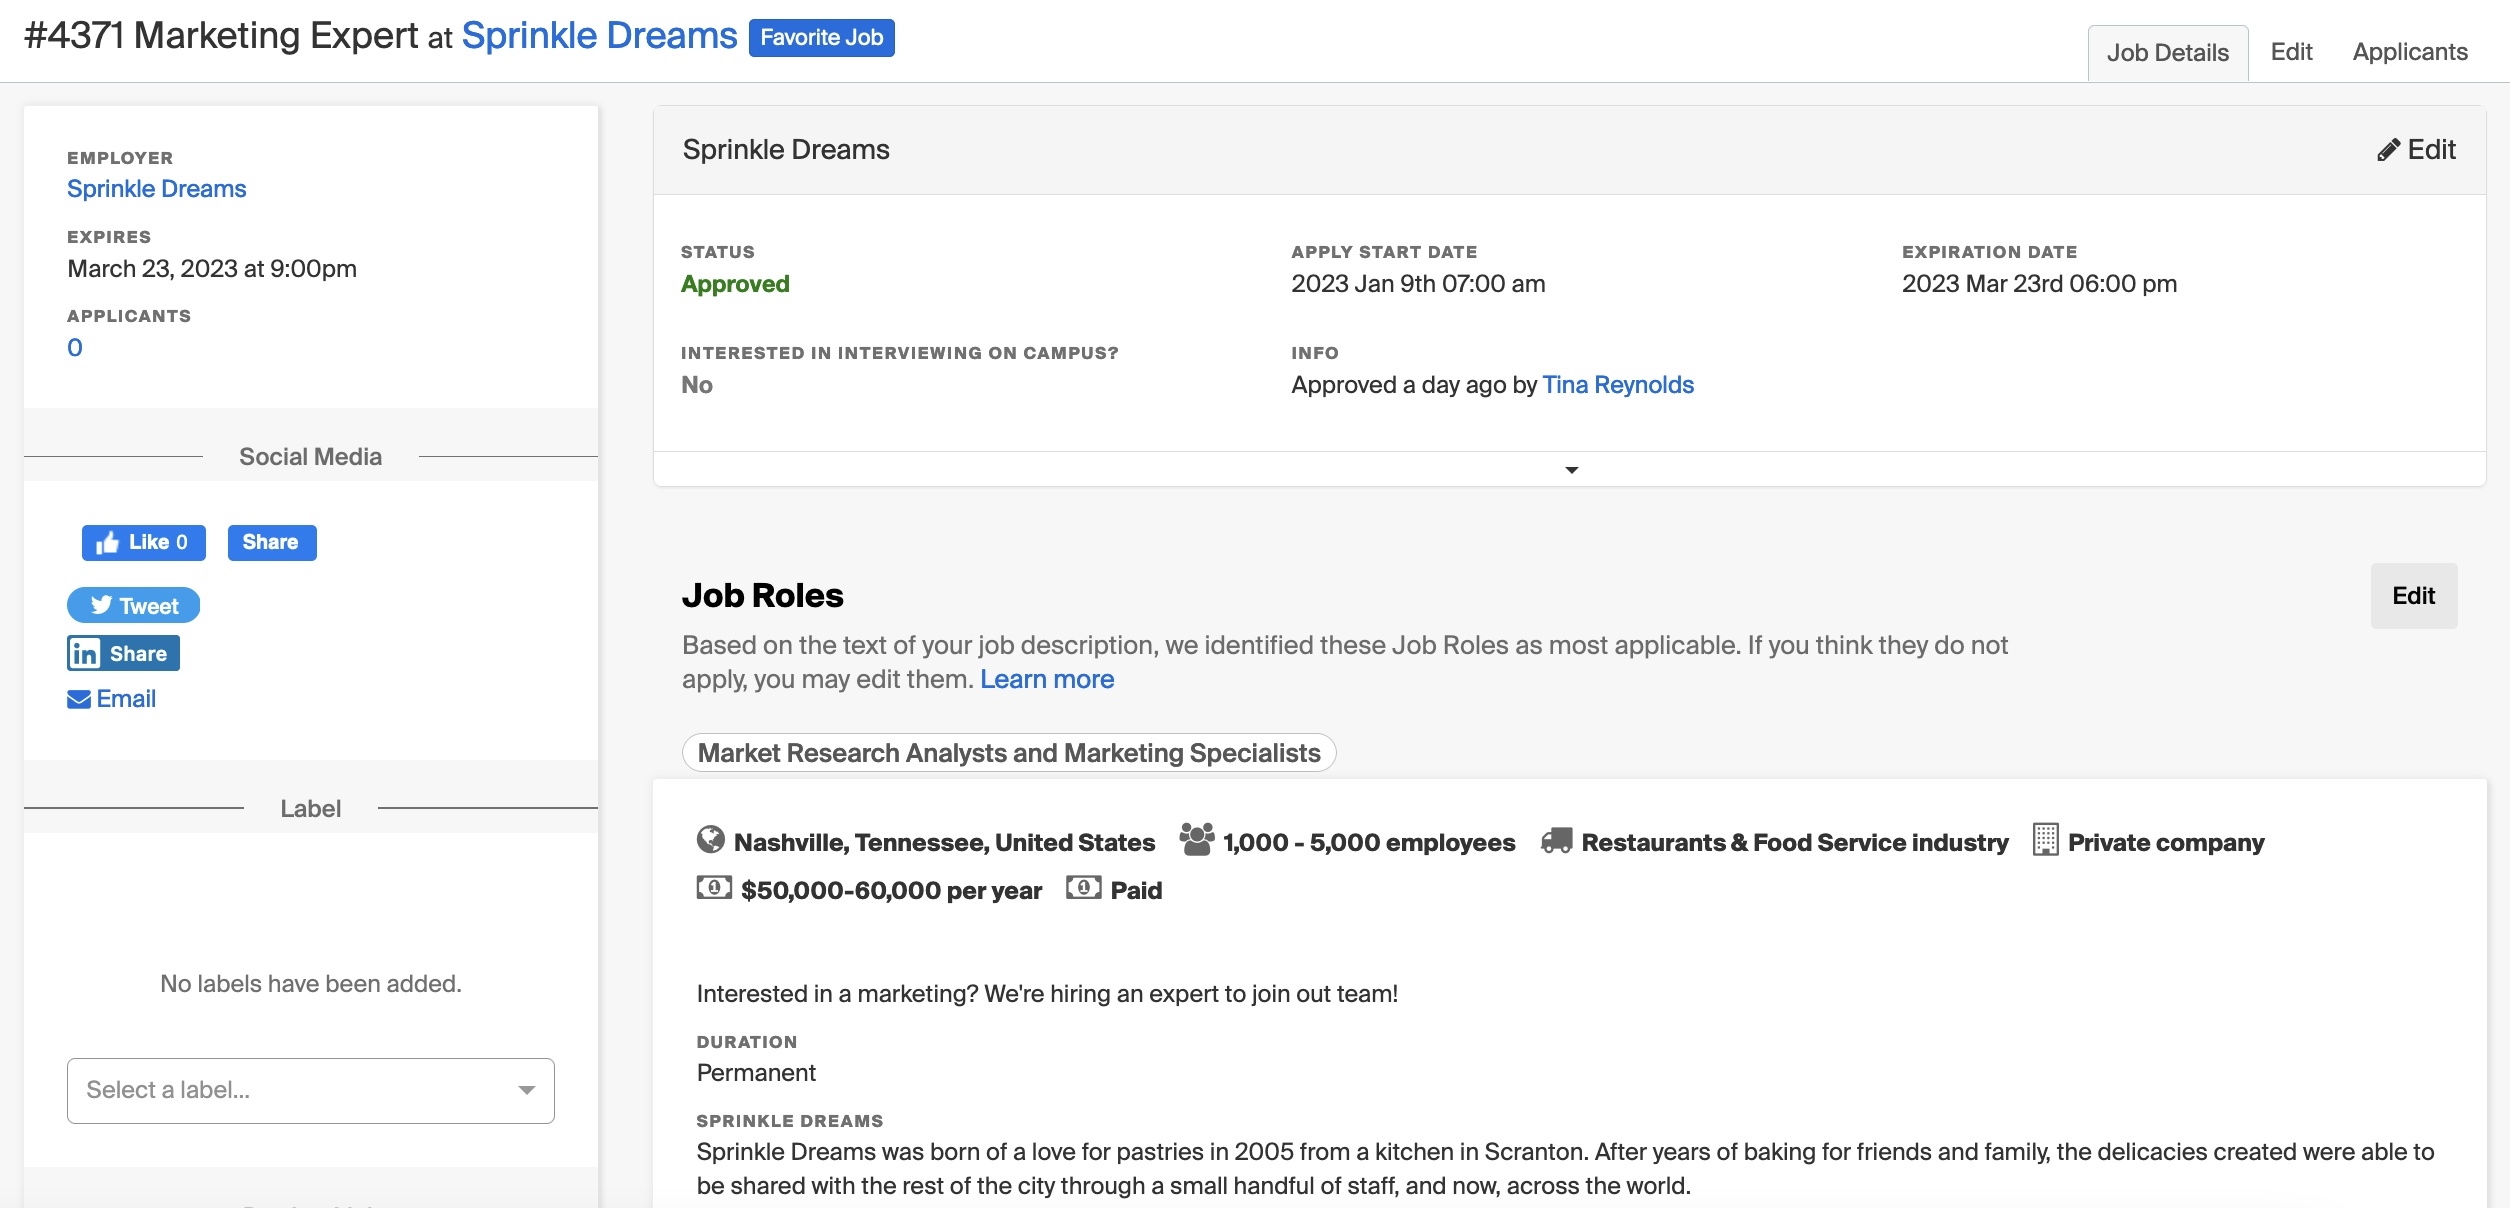 Apply_Start_Date_on_Job_Overview_Page.png